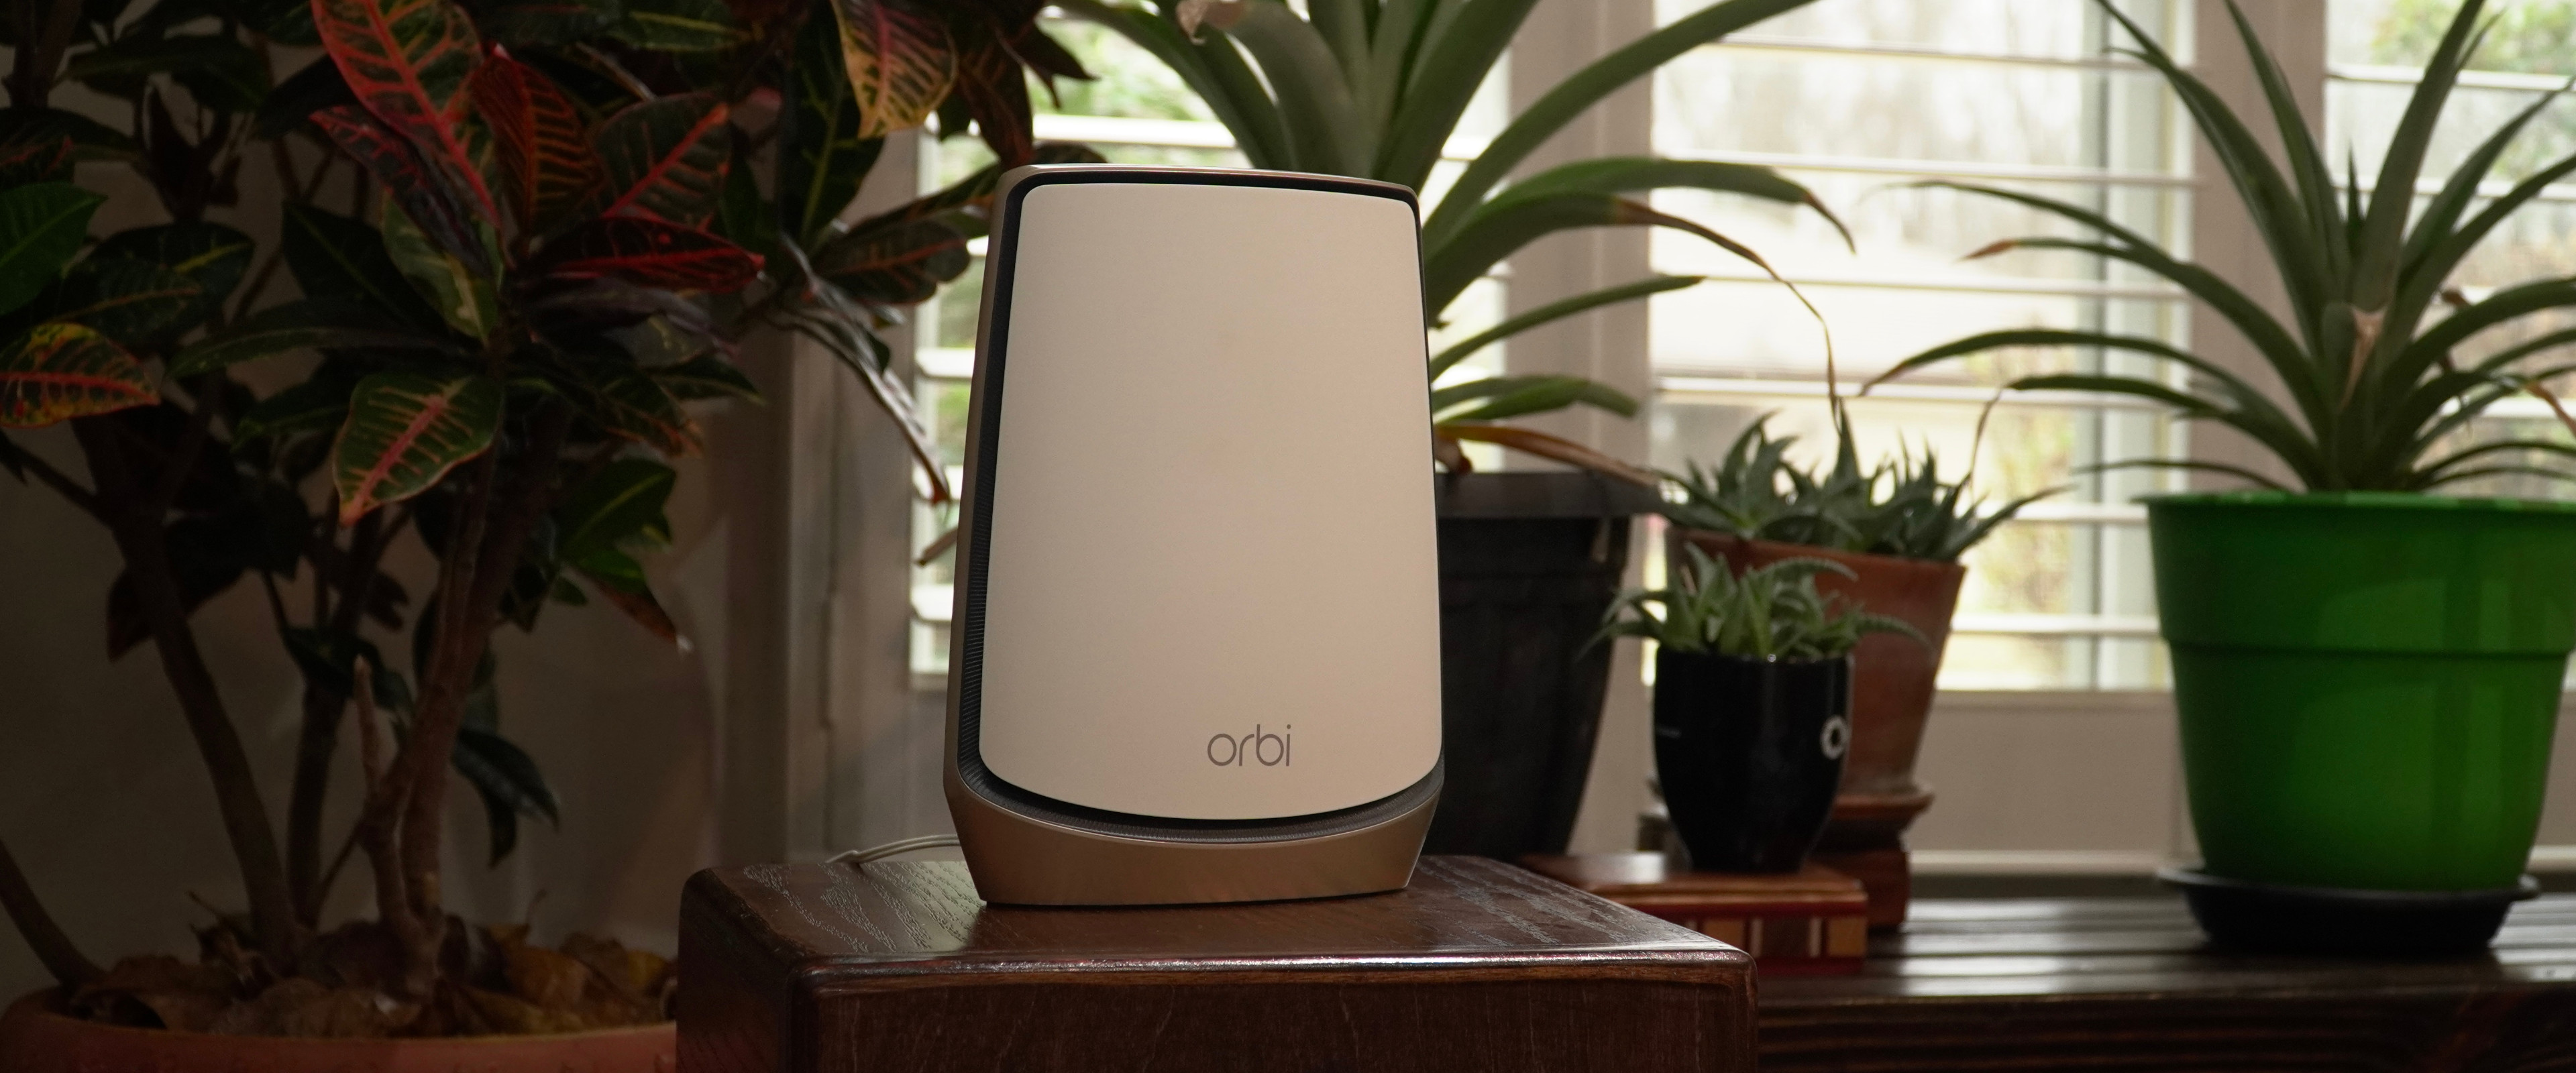 Review of NETGEAR's Orbi Wi-Fi 6 Mesh System and Optimisation